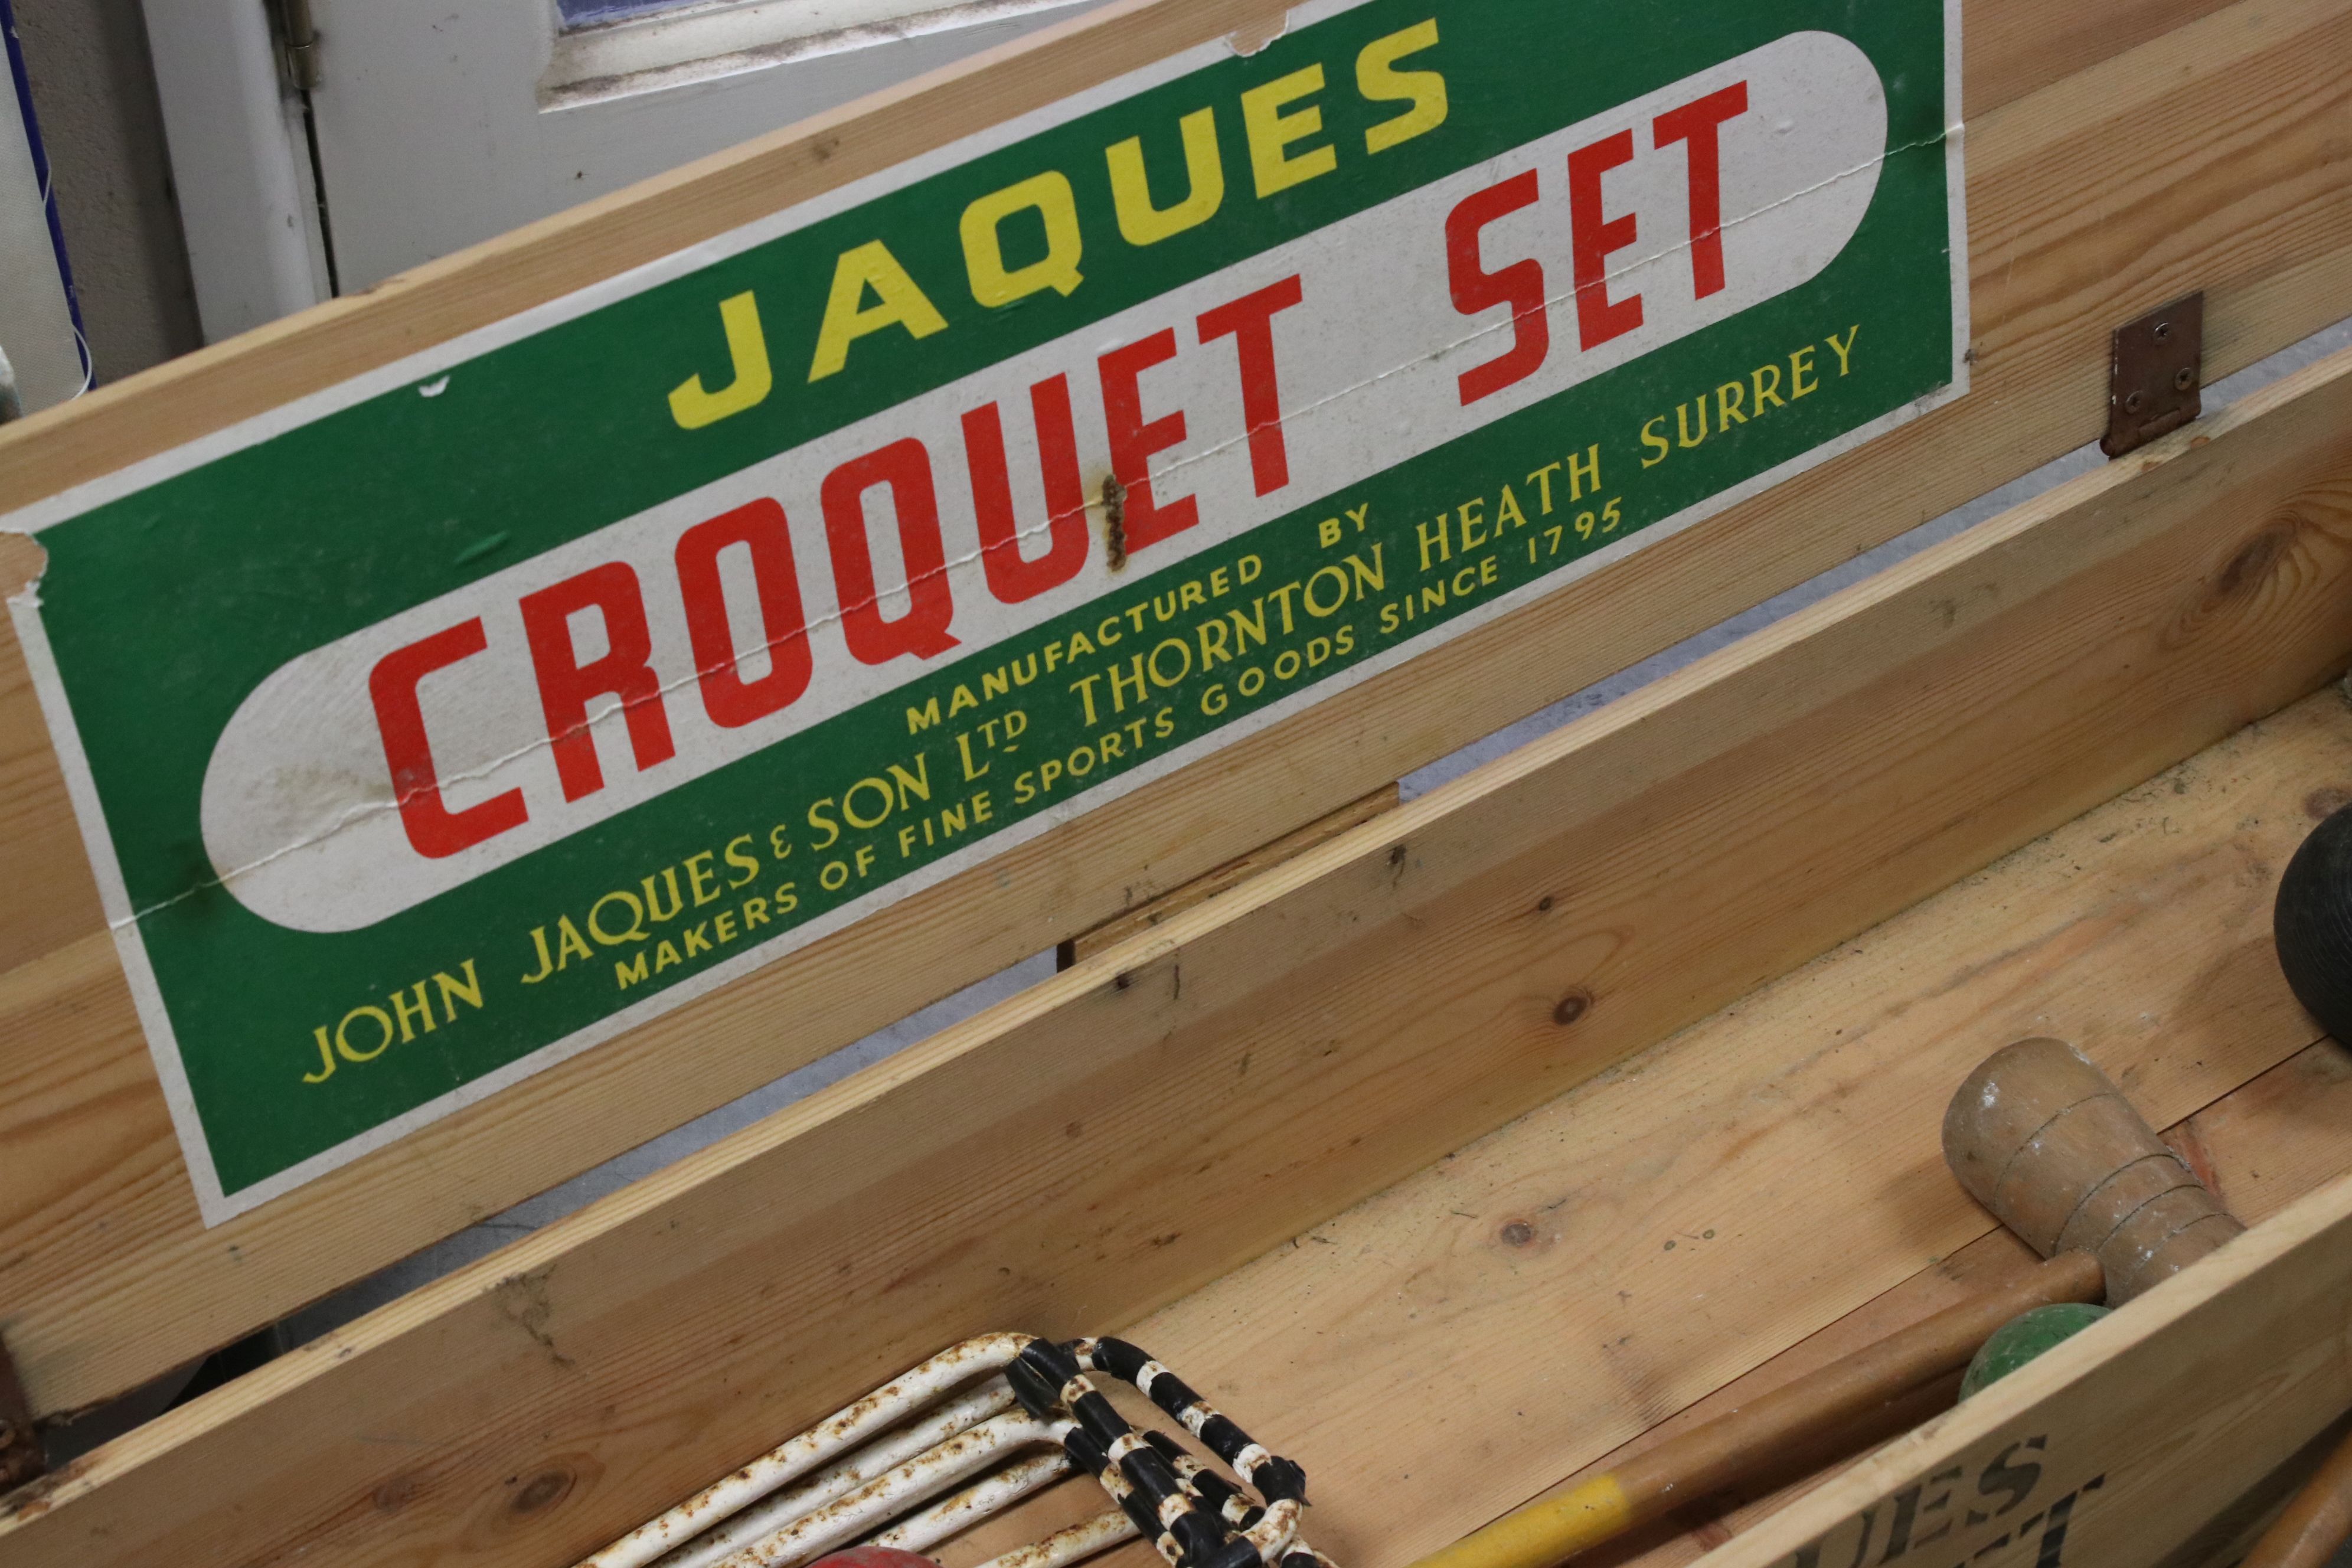 Jaques of London Croquet Set in it's Pine Box - Image 4 of 6